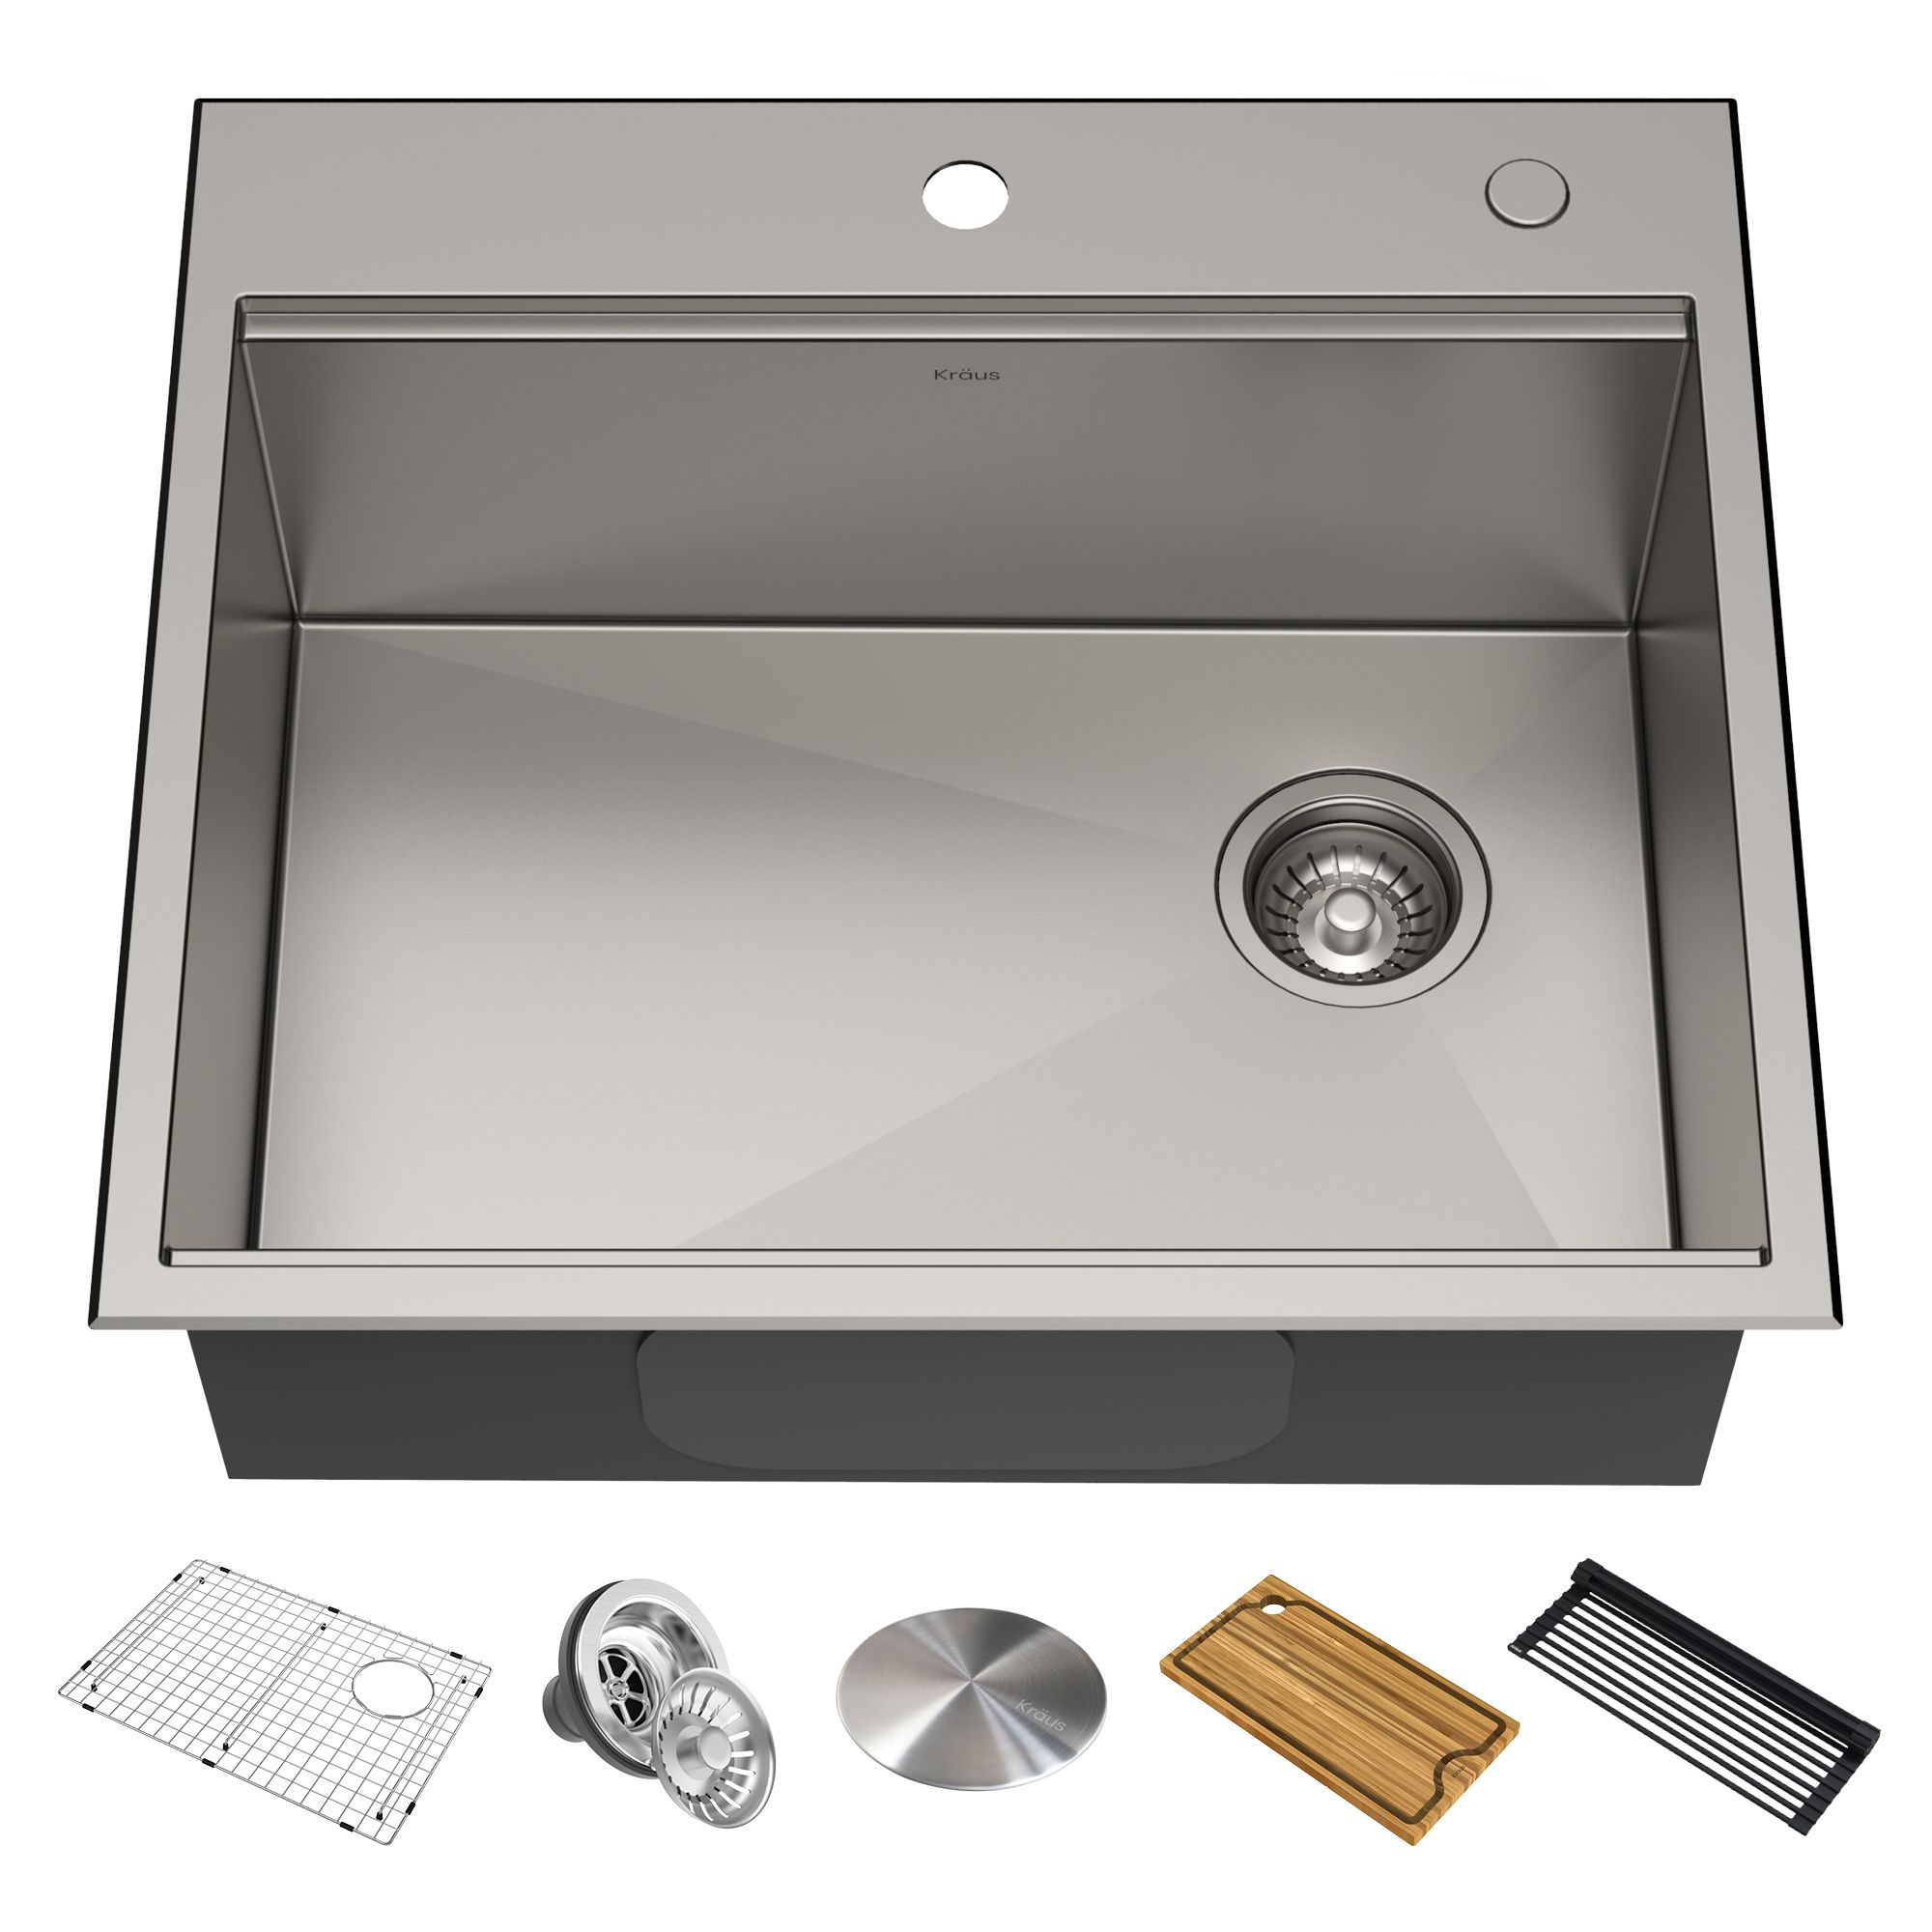 KRAUS KWT311-25 KORE WORKSTATION 25 INCH DROP-IN 16 GAUGE SINGLE BOWL STAINLESS STEEL KITCHEN SINK WITH ACCESSORIES (PACK OF 5)